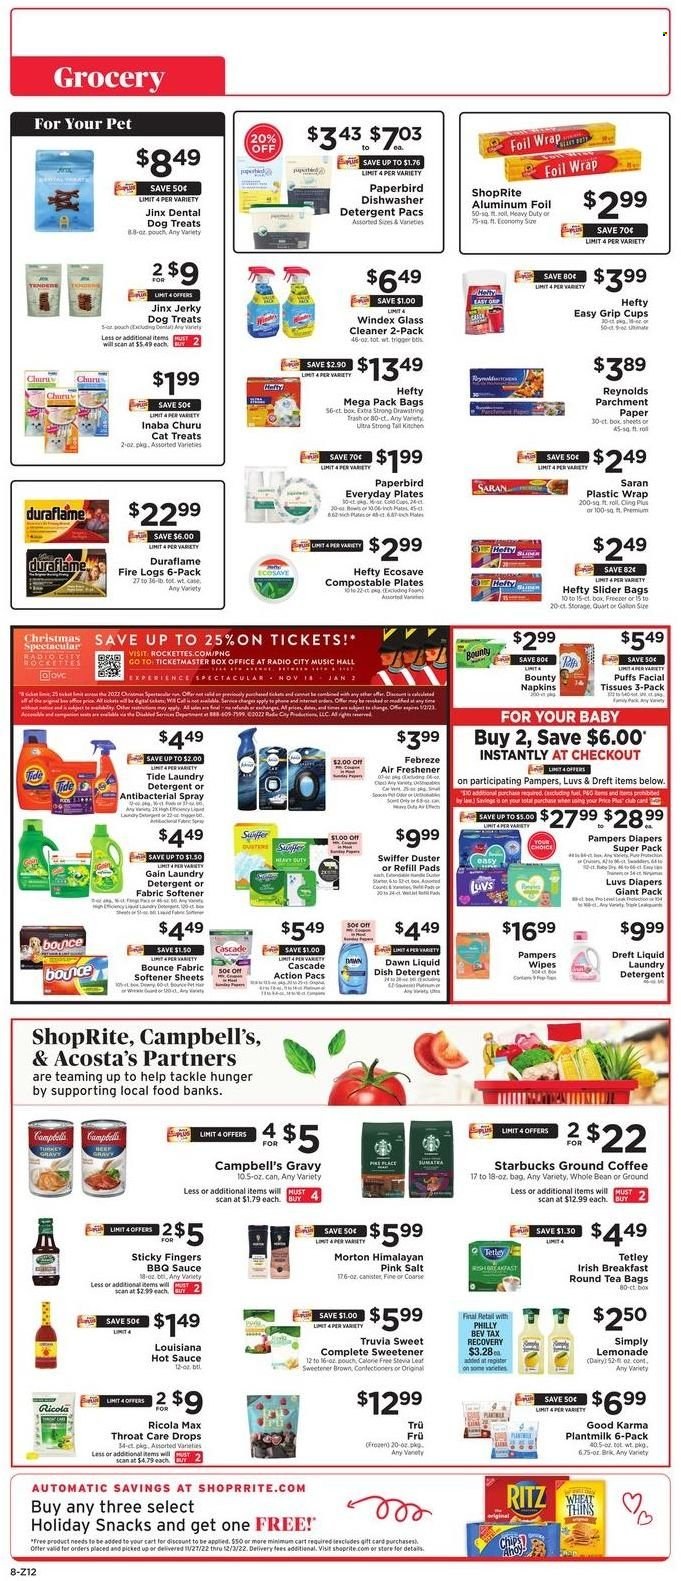 thumbnail - ShopRite Flyer - 11/27/2022 - 12/03/2022 - Sales products - pie, puffs, Campbell's, sauce, jerky, ricola, snack, Bounty, RITZ, Thins, stevia, sweetener, BBQ sauce, turkey gravy, hot sauce, lemonade, tea bags, coffee, Starbucks, ground coffee, wipes, Pampers, napkins, nappies, tissues, detergent, Febreze, Gain, Windex, cleaner, glass cleaner, Swiffer, Cascade, Tide, fabric softener, laundry detergent, Bounce, dishwasher cleaner, facial tissues, Sure, Hefty, duster, plate, cup, aluminium foil, paper, air freshener, antibacterial spray, bra. Page 8.